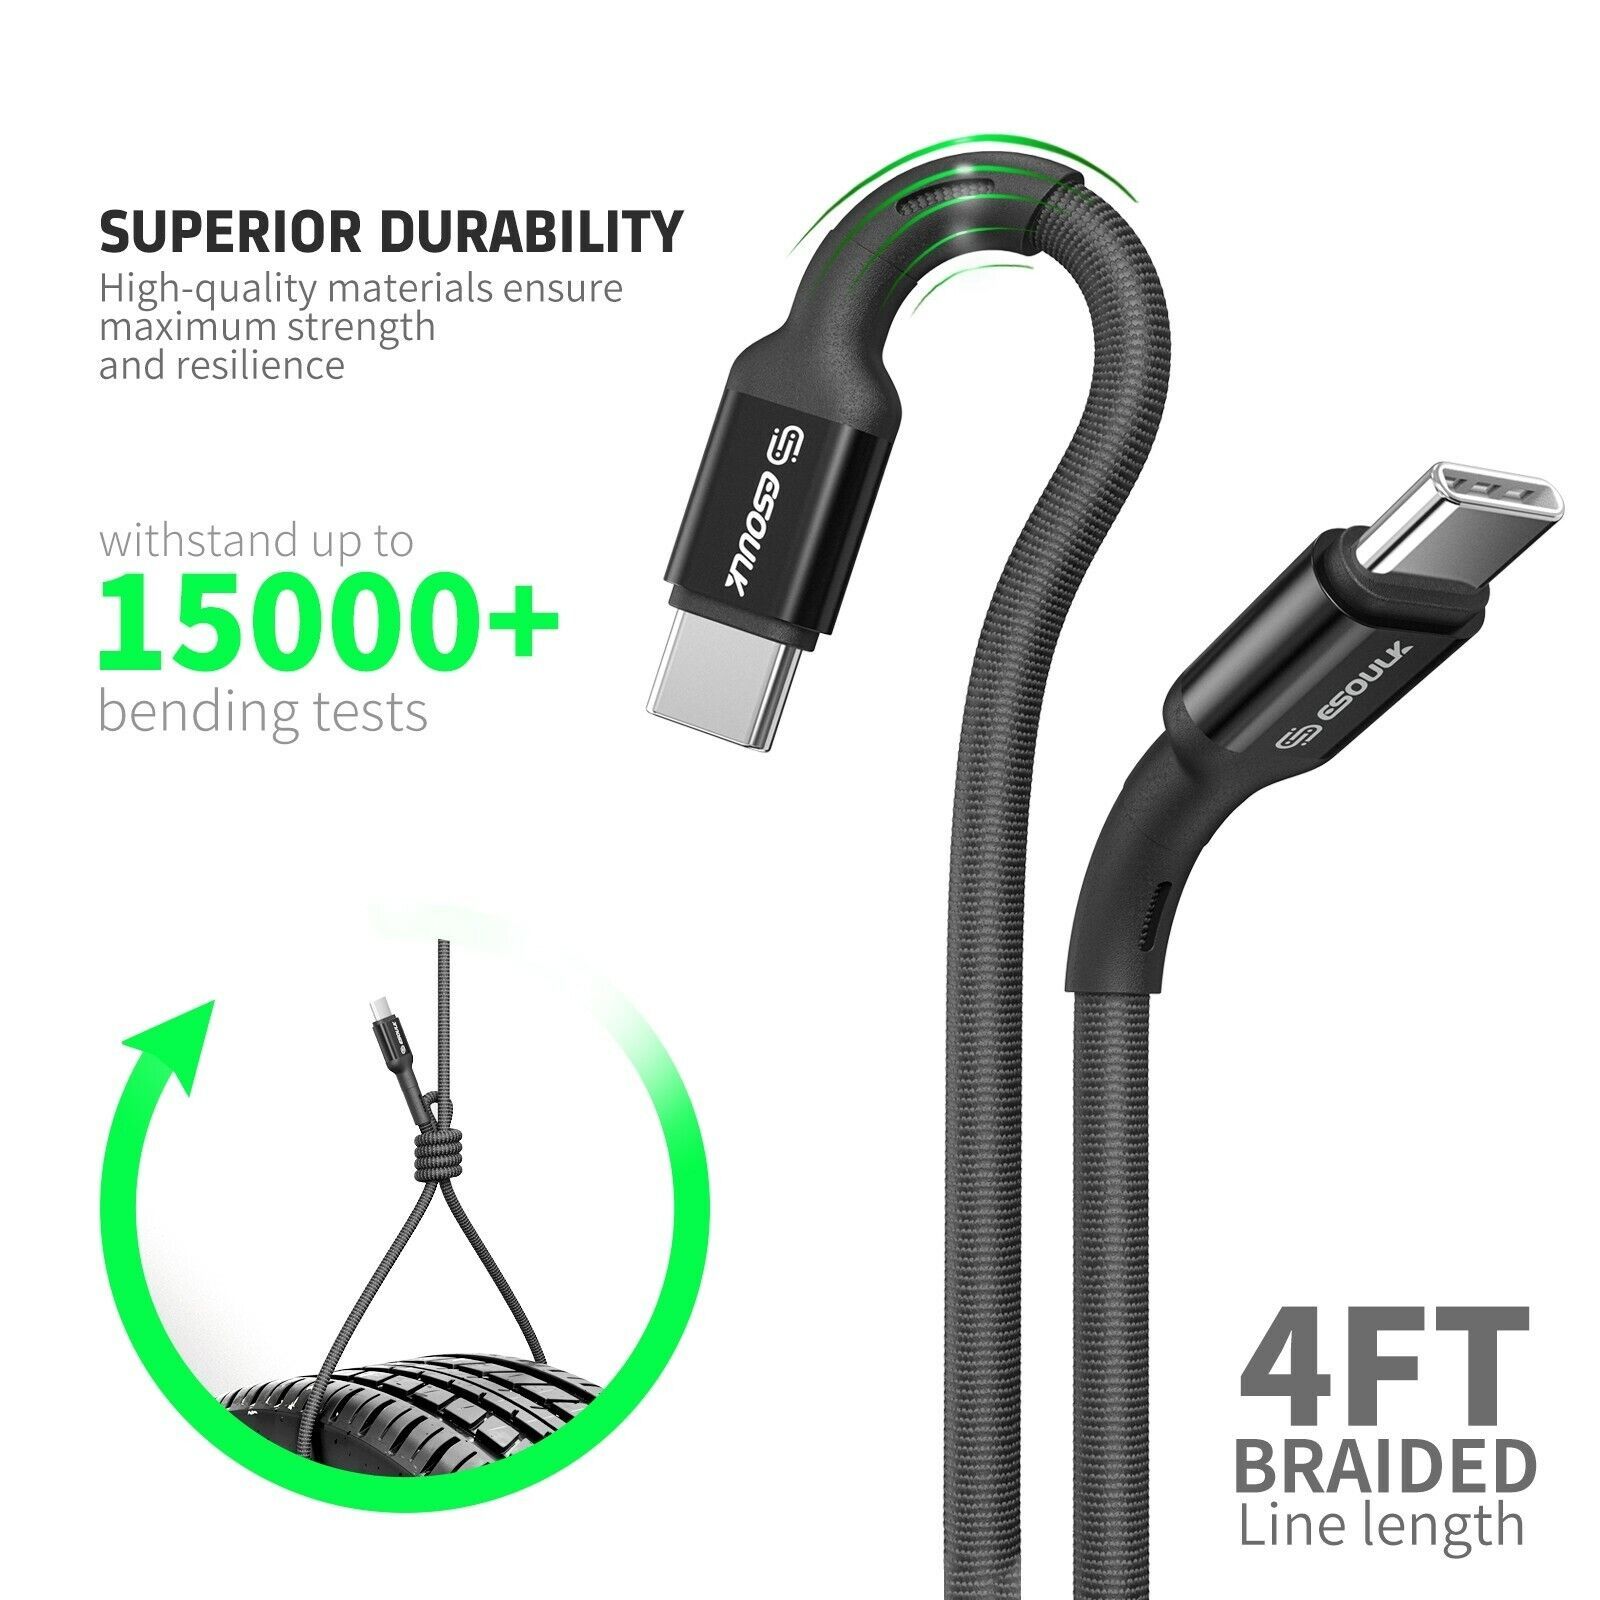 4FT Type C to C Fast Charge Cable For Cricket Alcatel Lumos / AT&T Alcatel Axel - $9.85